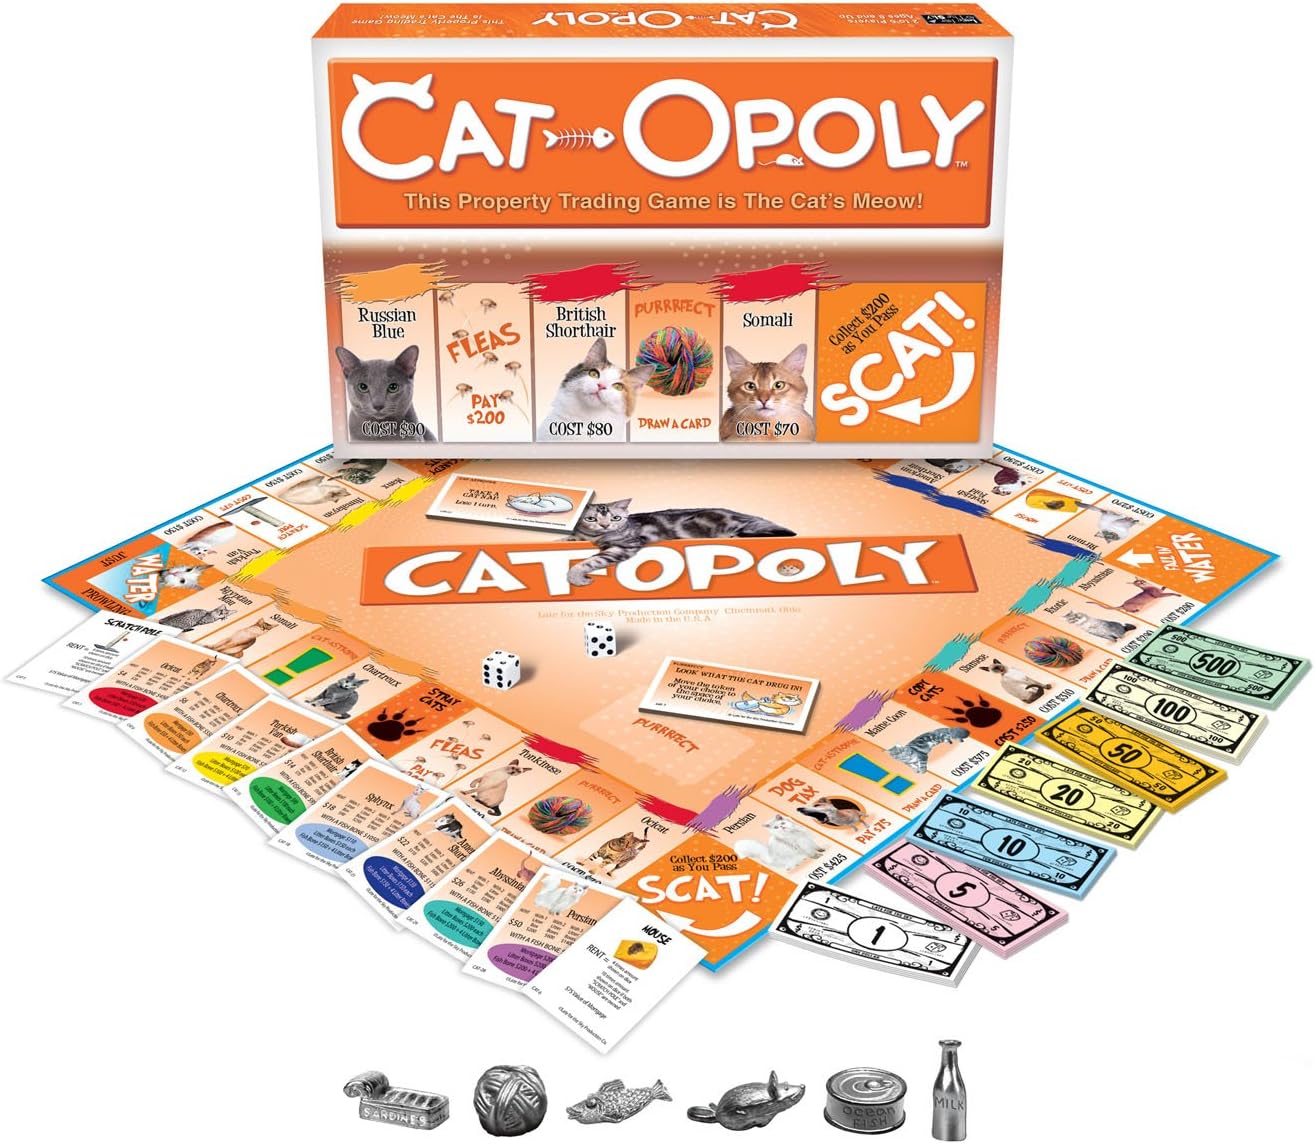 Cat-Opoloy